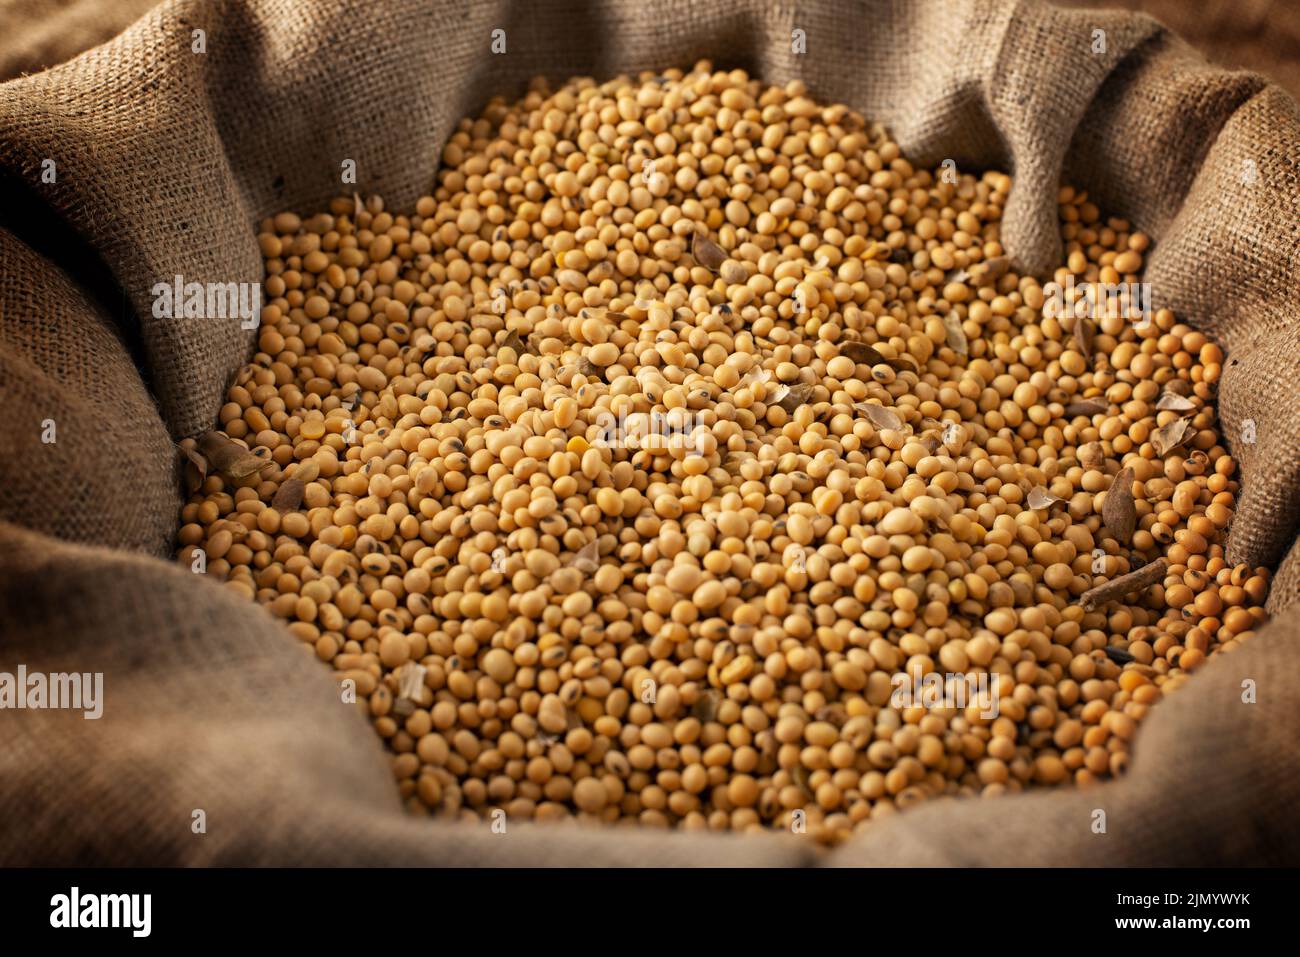 Food background of raw soybeans in burlap sack Stock Photo